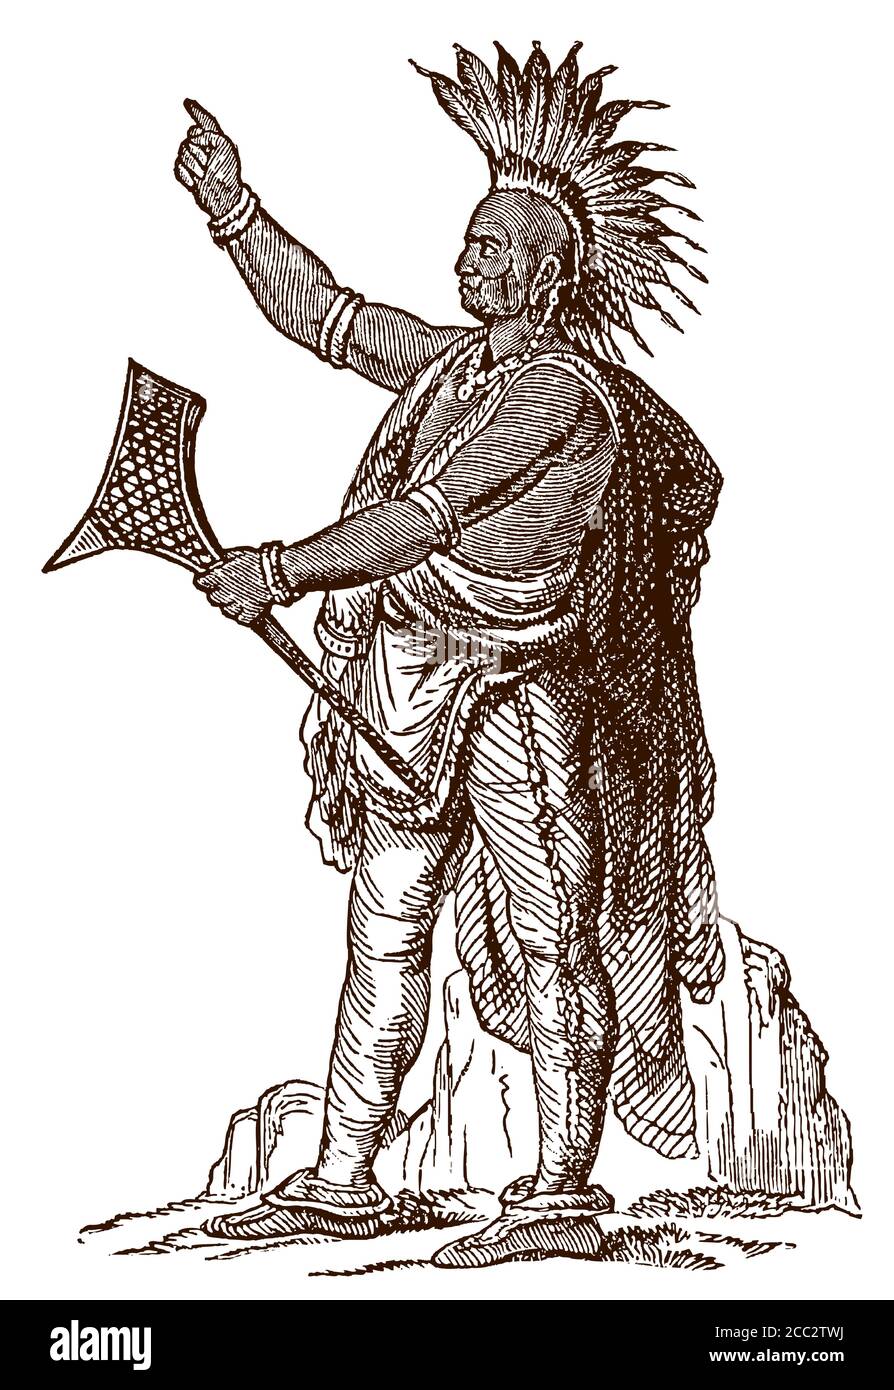 Pontiac, the famous Ottawa chief in full body view, holding a war club and wearing a feather headdress. Illustration after an antique engraving Stock Vector